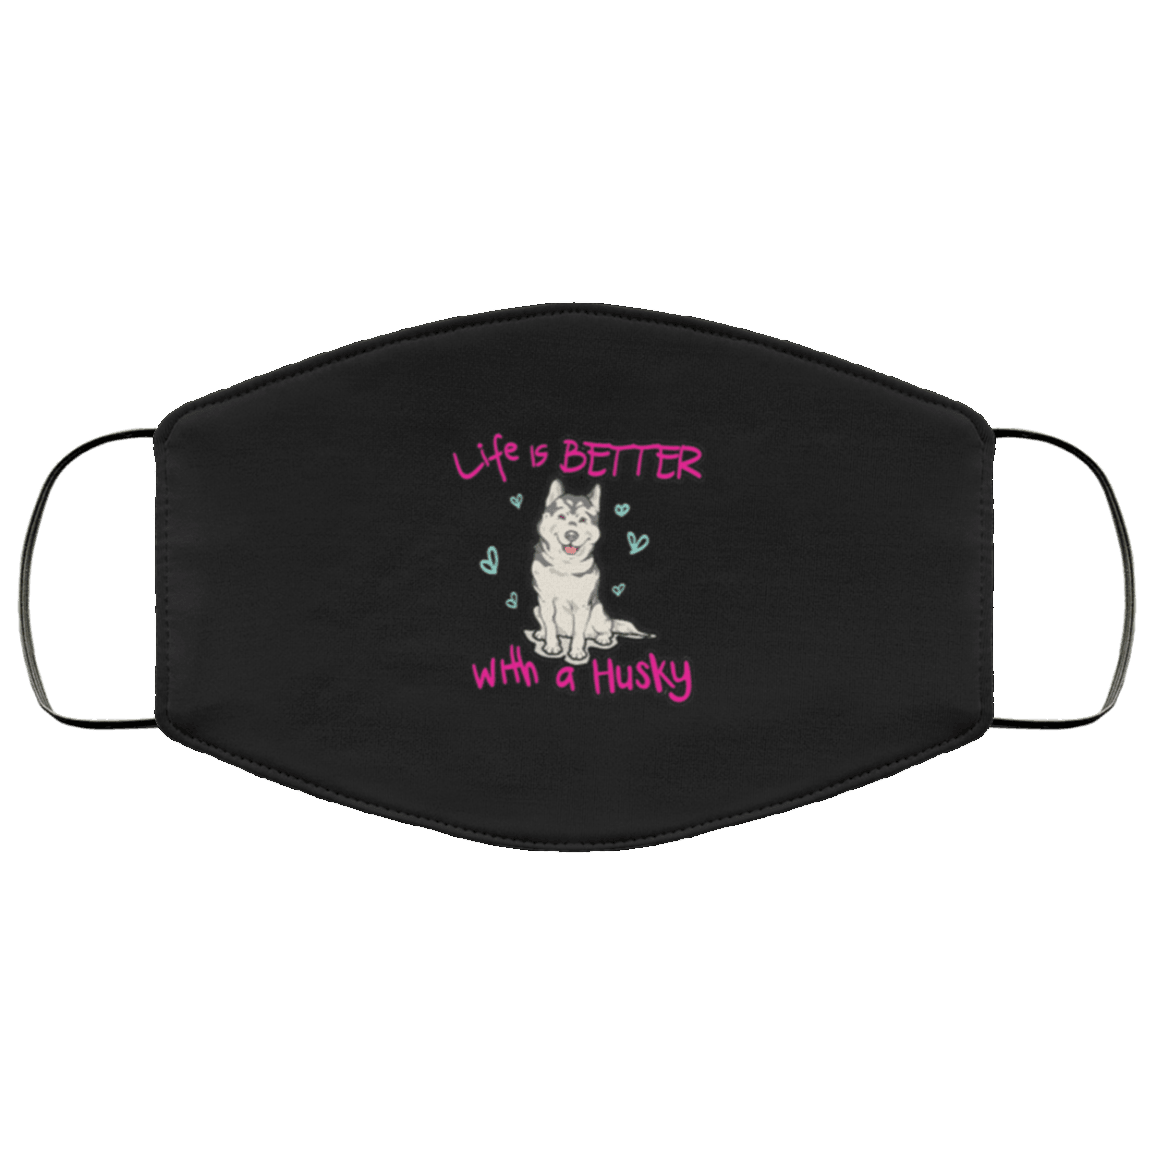 Designs by MyUtopia Shout Out:Life Is Better with a Husky Adult Fabric Face Mask with Elastic Ear Loops,3 Layer Fabric Face Mask / Black / Adult,Fabric Face Mask